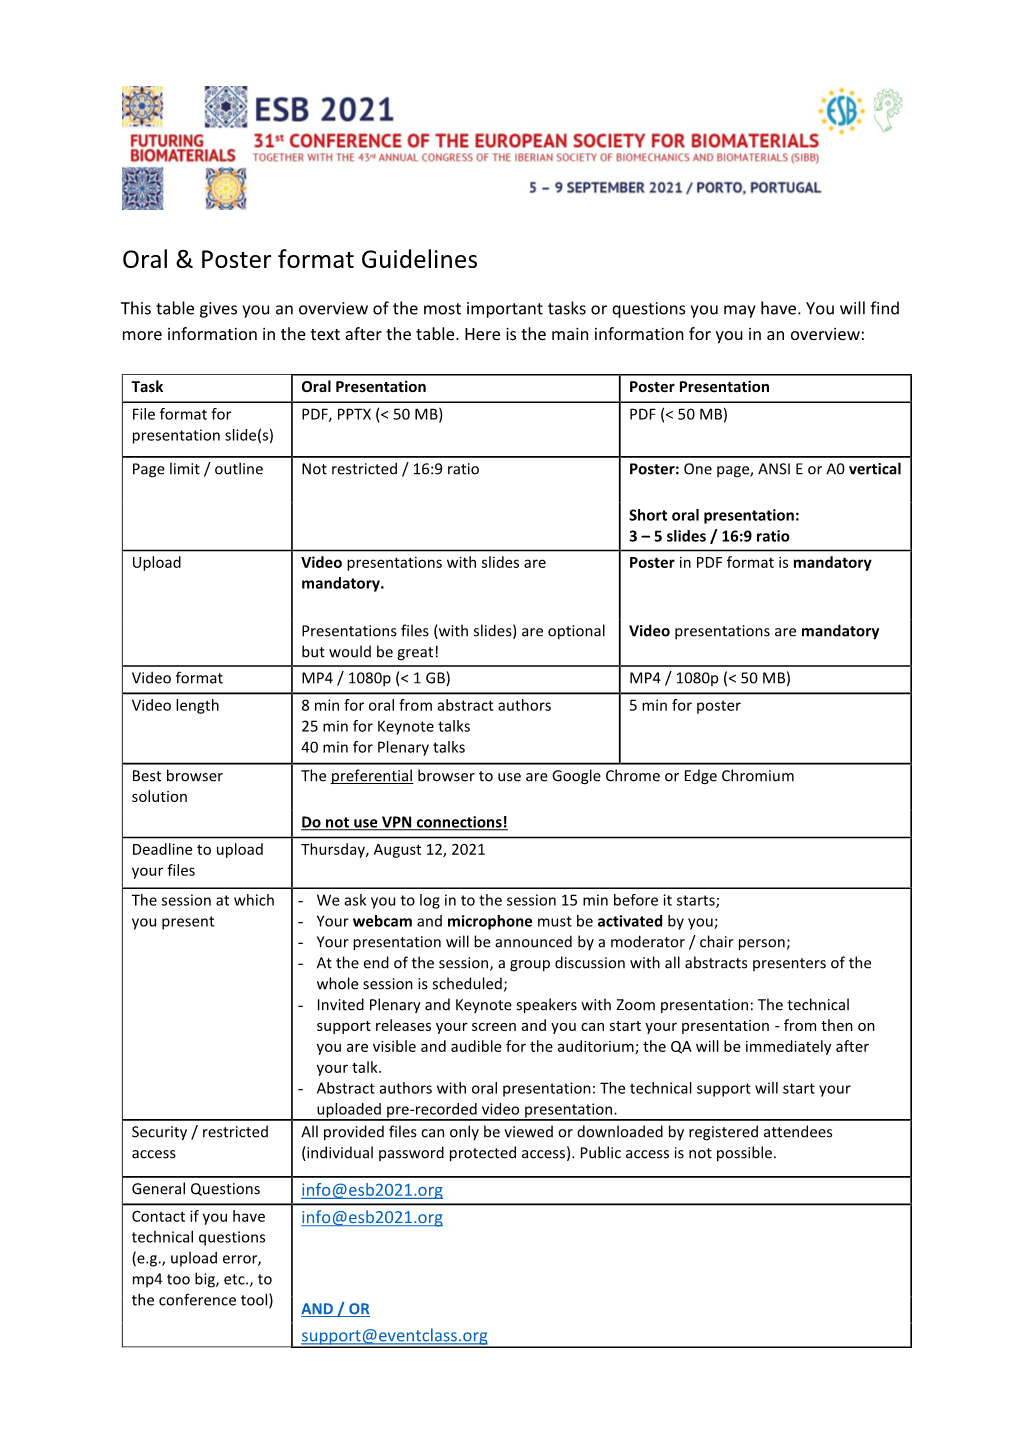 Oral & Poster Format Guidelines